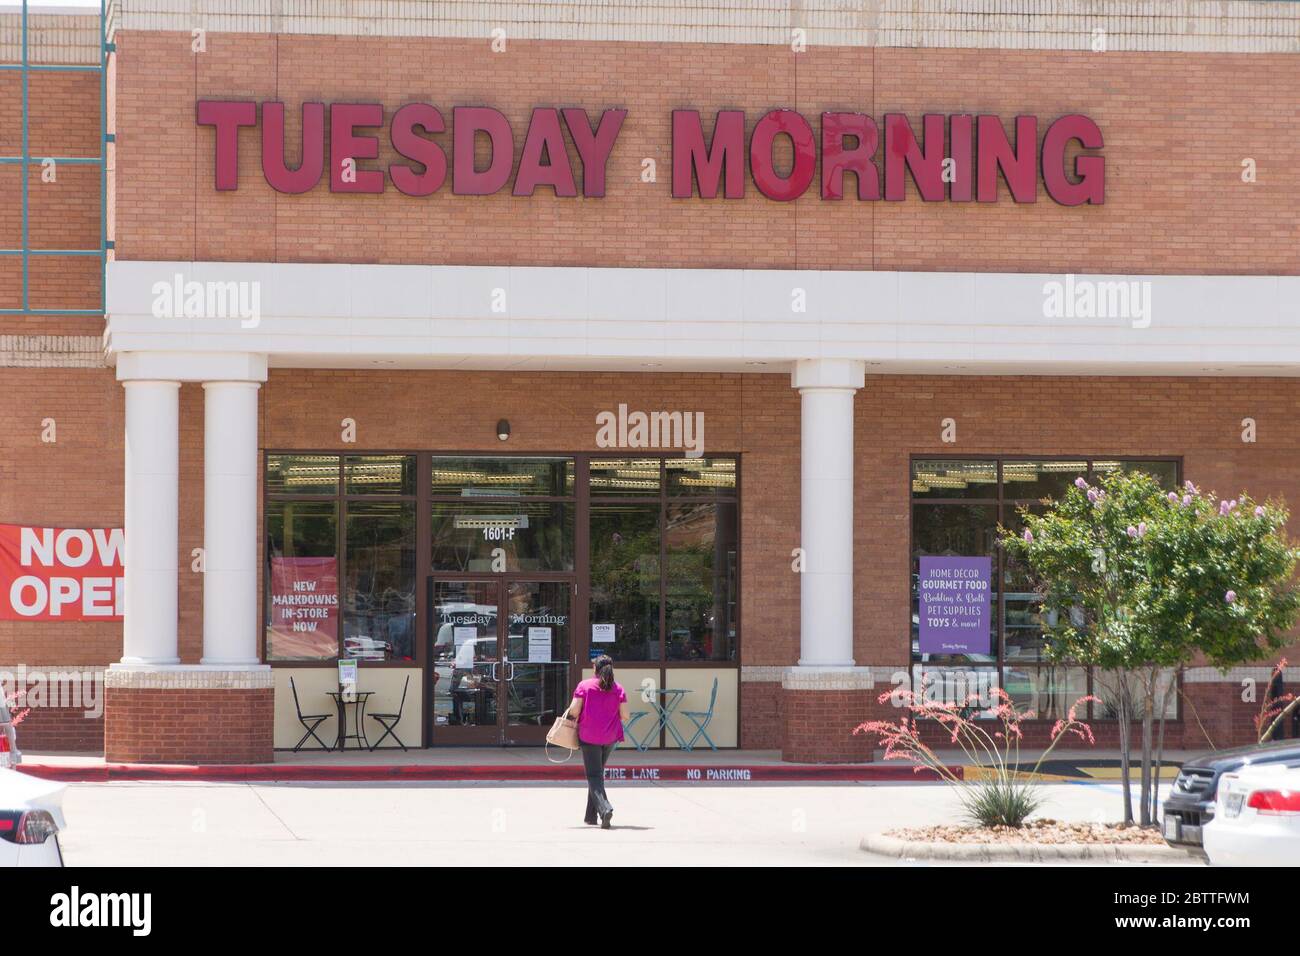 Dallas, USA. 27th May, 2020. Photo taken on May 27, 2020 shows a Tuesday Morning store in Plano of Texas, the United States. U.S. off-price retailer Tuesday Morning has filed for bankruptcy protection amid the COVID-19 pandemic, the company said Wednesday. Credit: Dan Tian/Xinhua/Alamy Live News Stock Photo